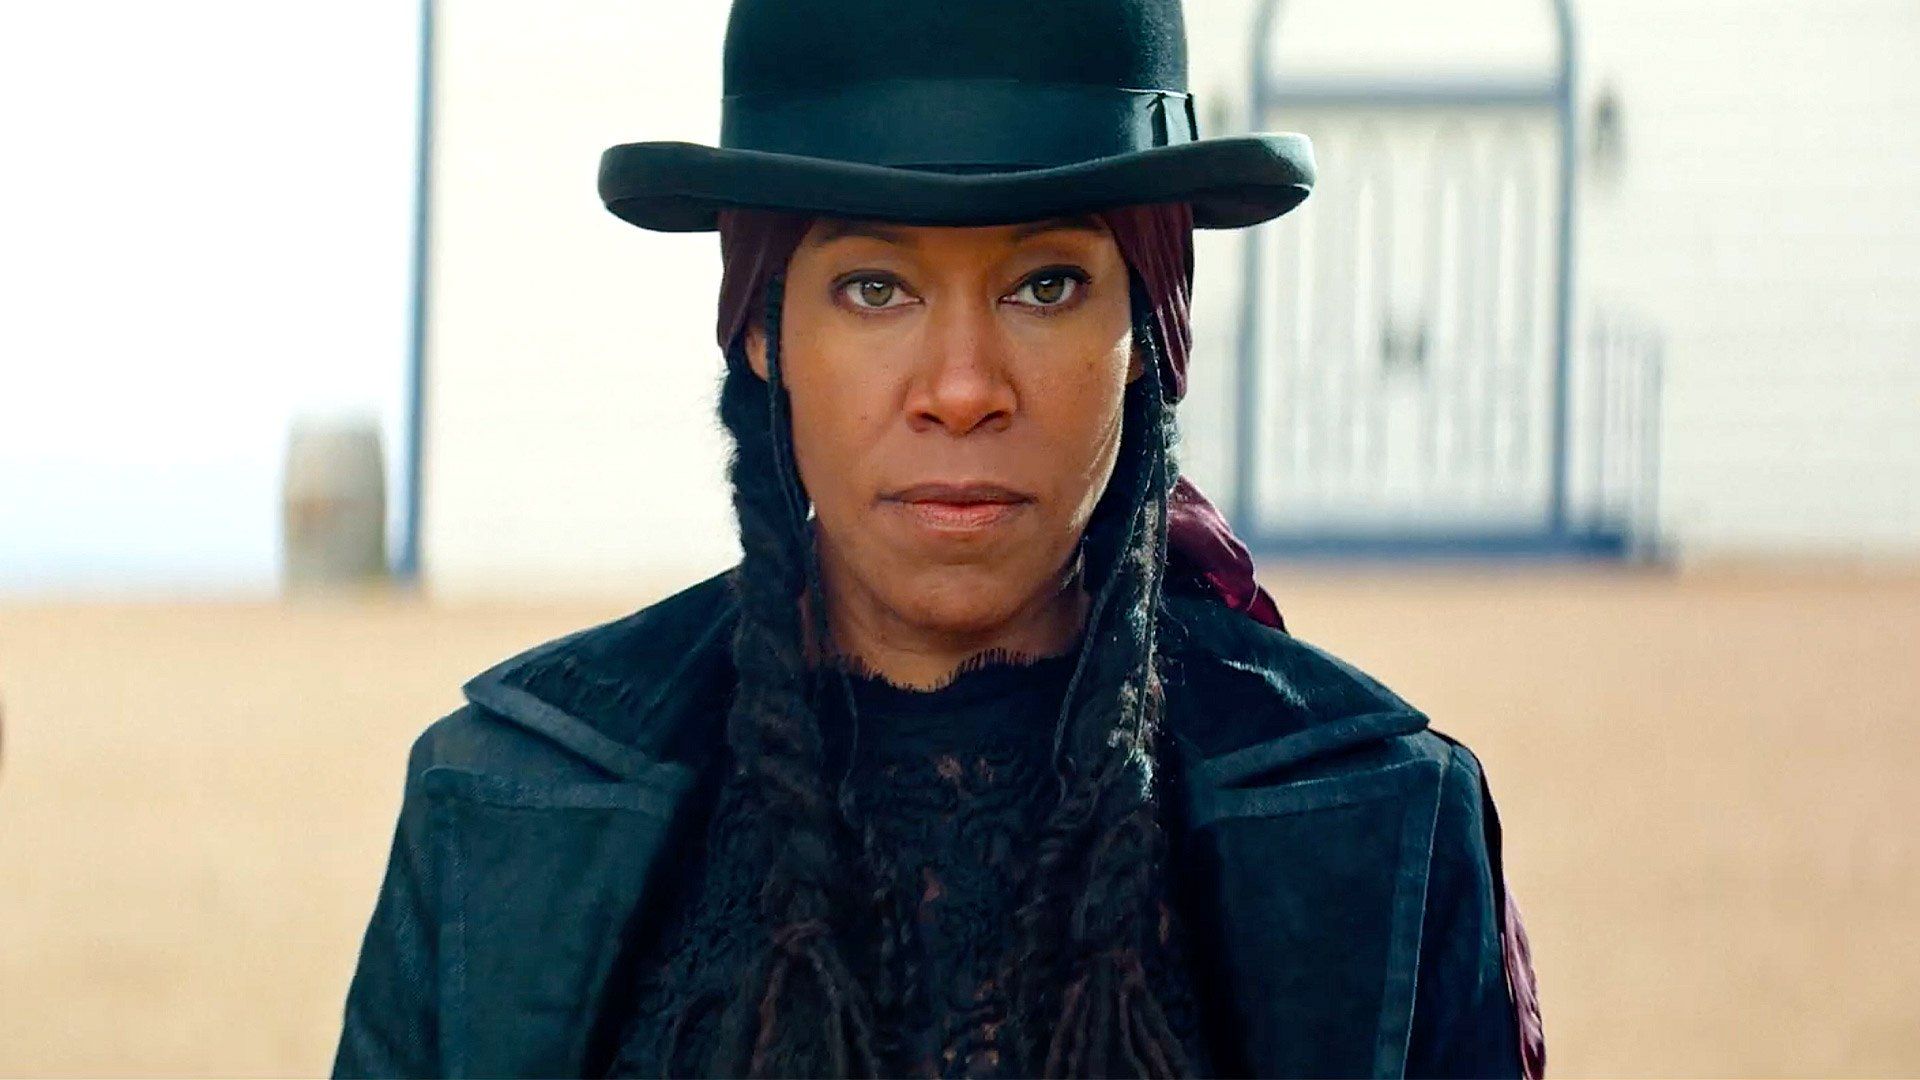 Regina King in 'The Harder They Fall'